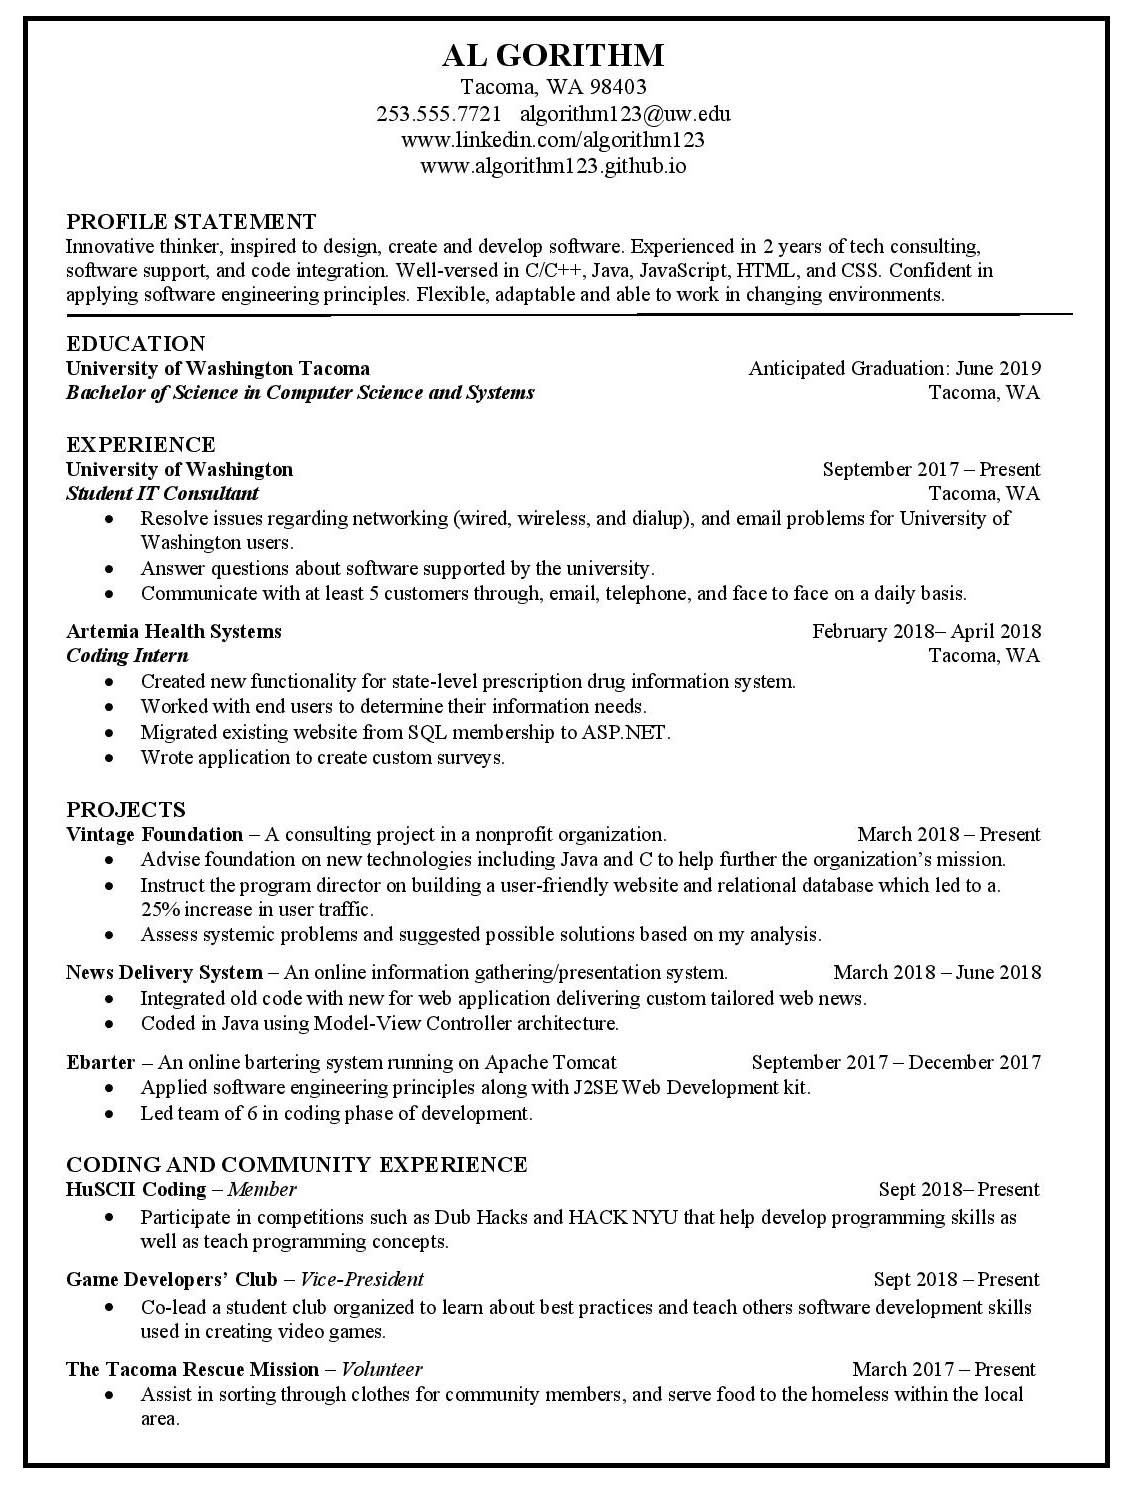 Sample Resume with Anticipated Graduation Date Resume & Cover Letter Career Development & Education …